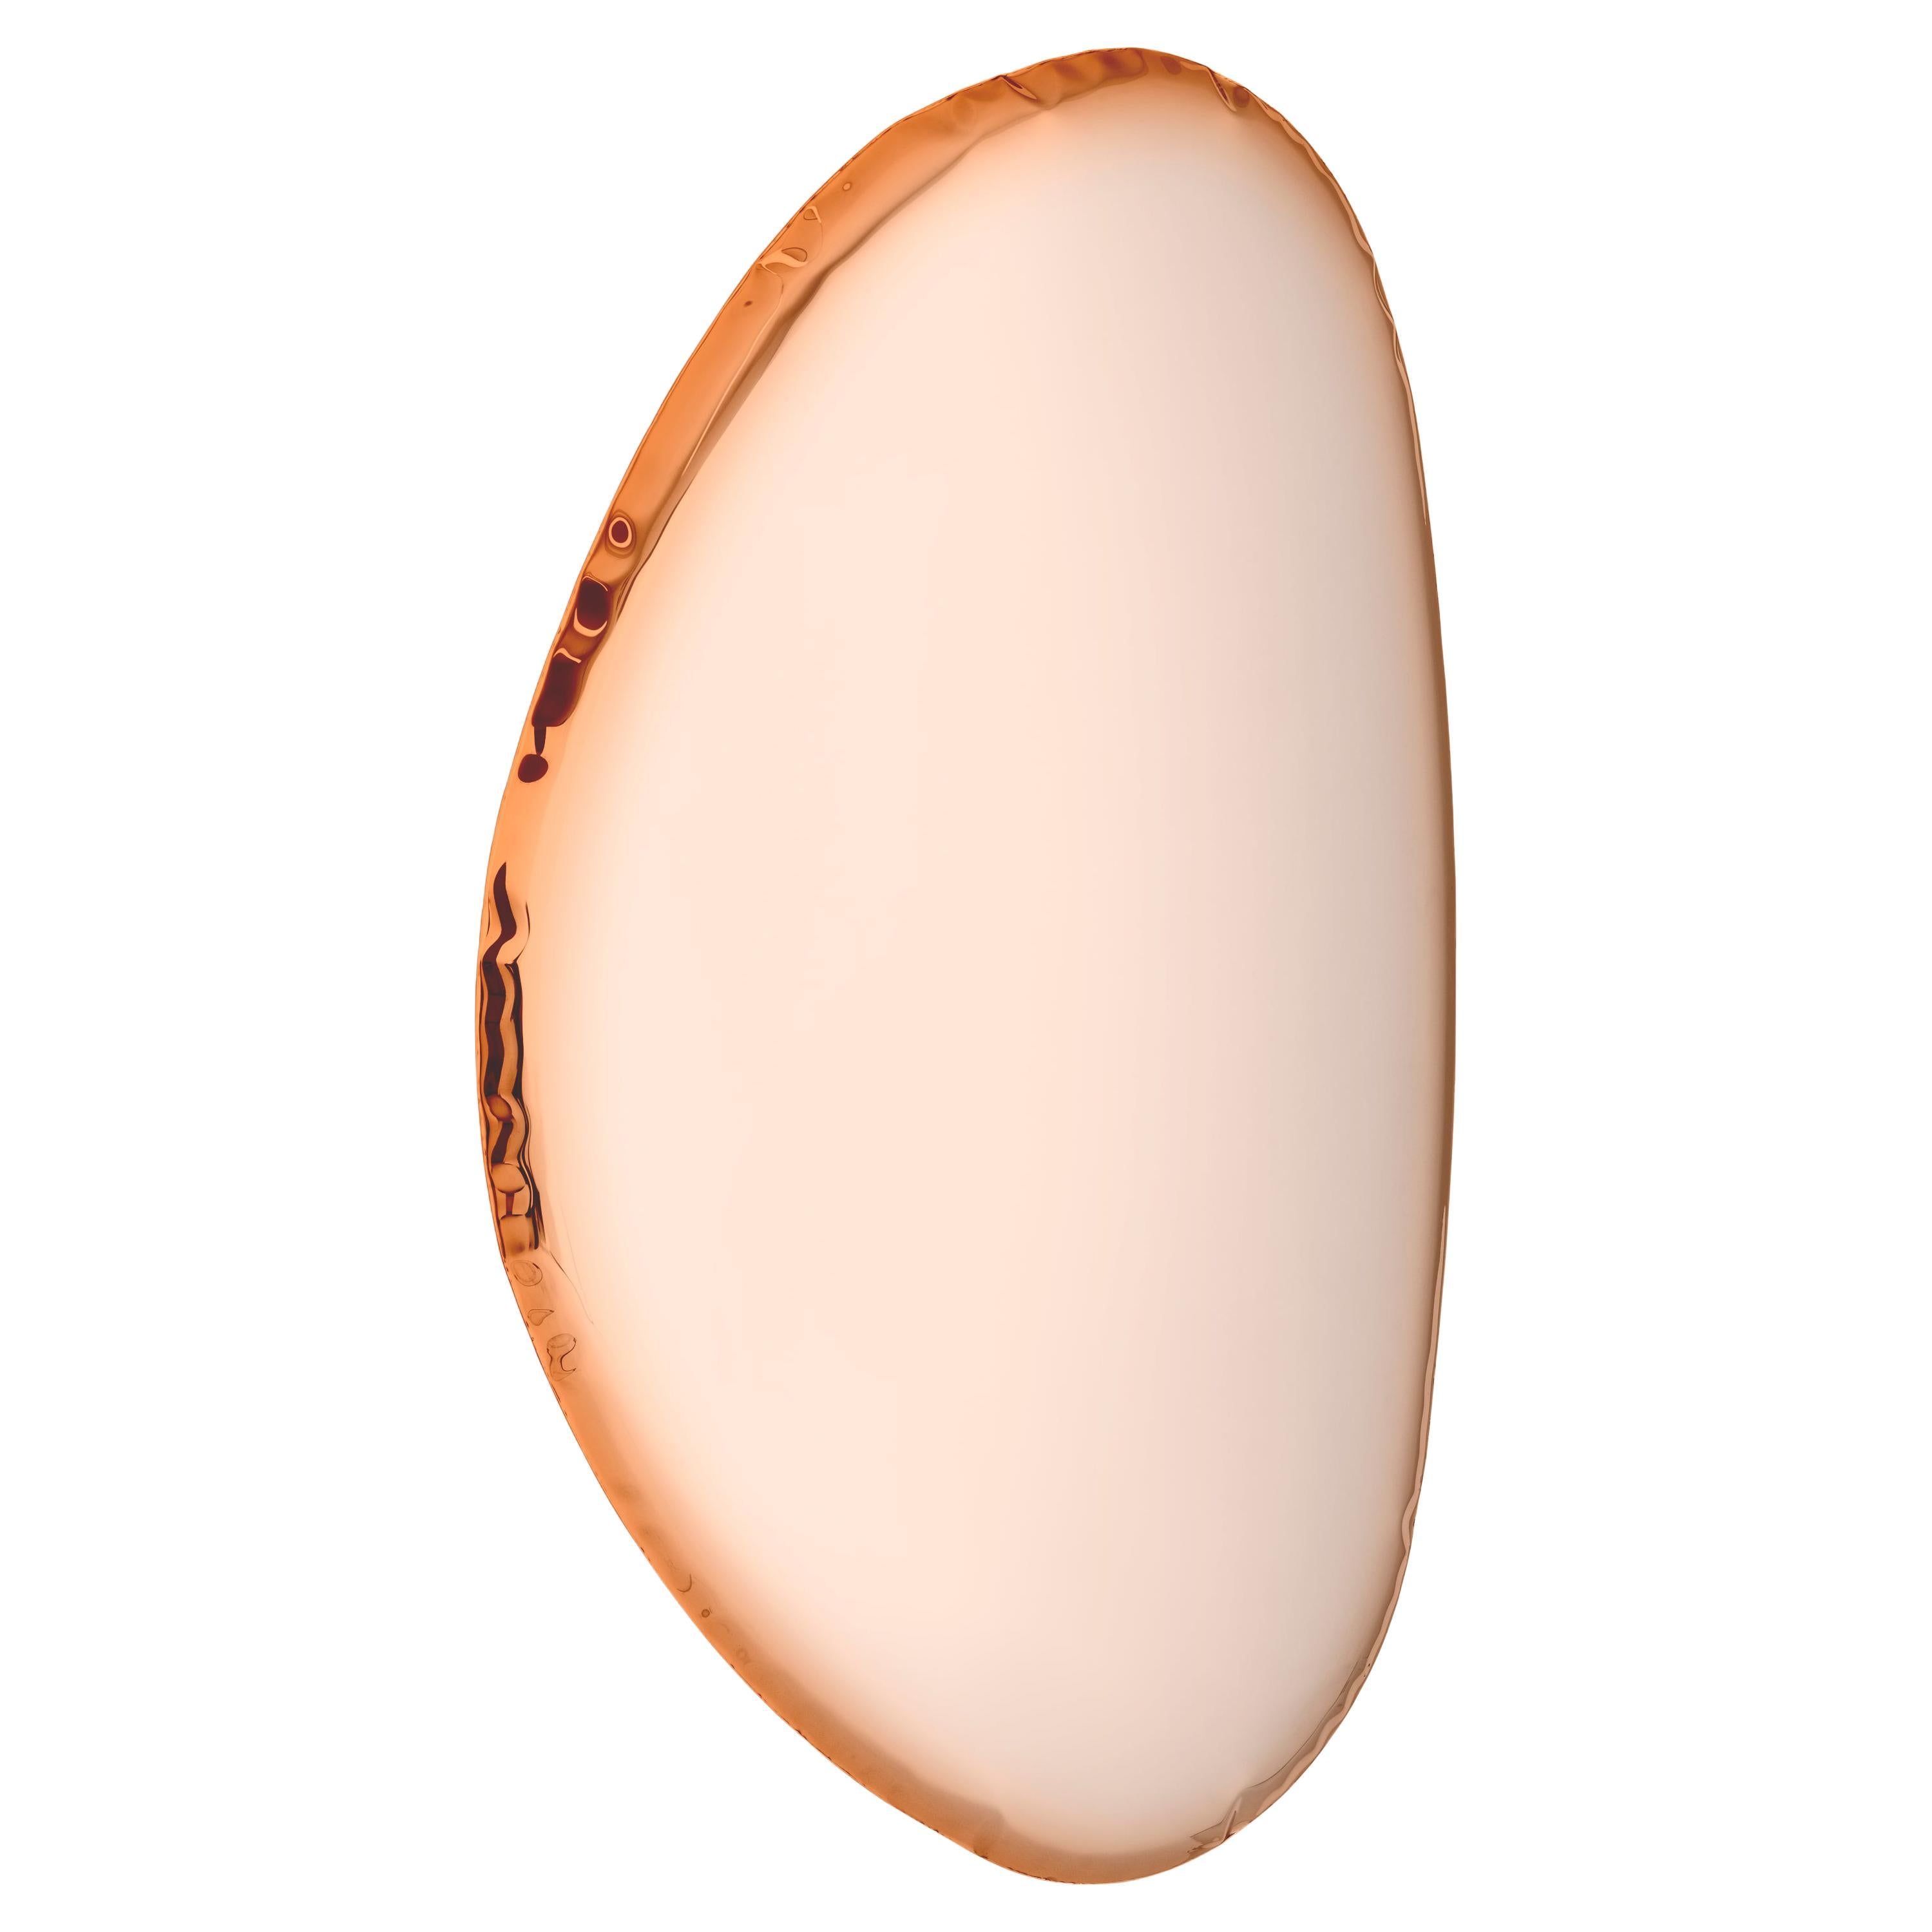 Contemporary Mirror 'Tafla O2', AURUM Collection, Rose Gold, by Zieta For Sale